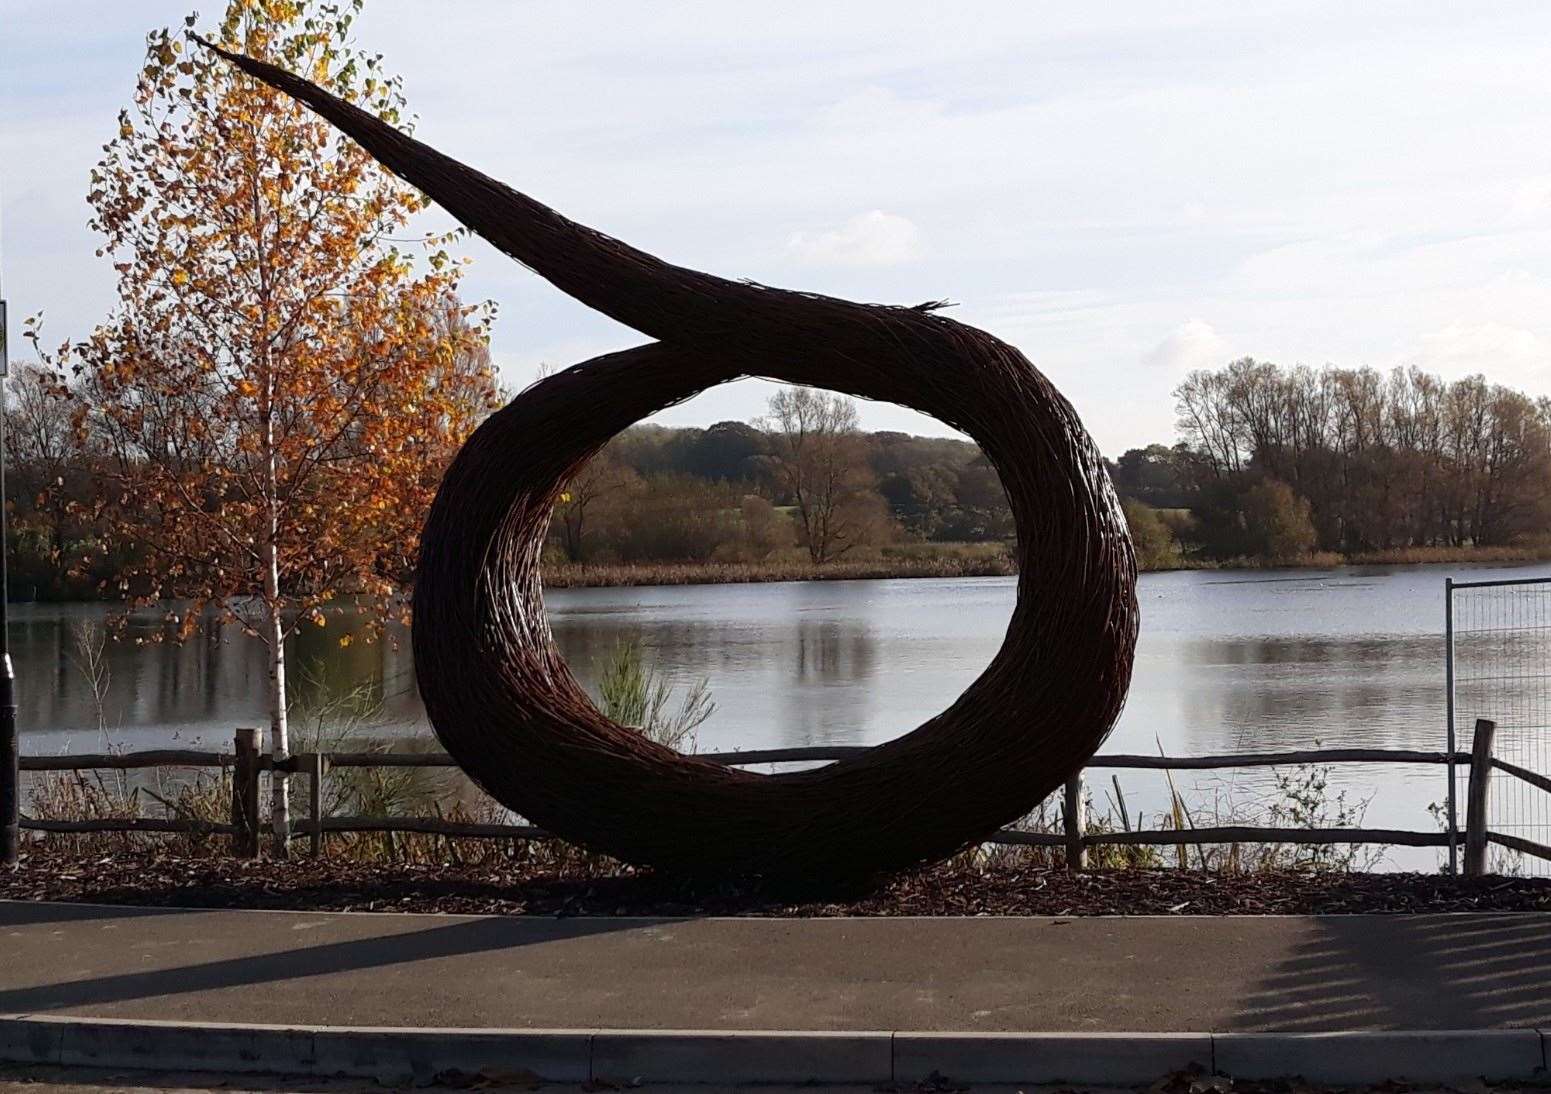 Wicker sculpture 'The Loop' has been installed at the Conningbrook Lakes development